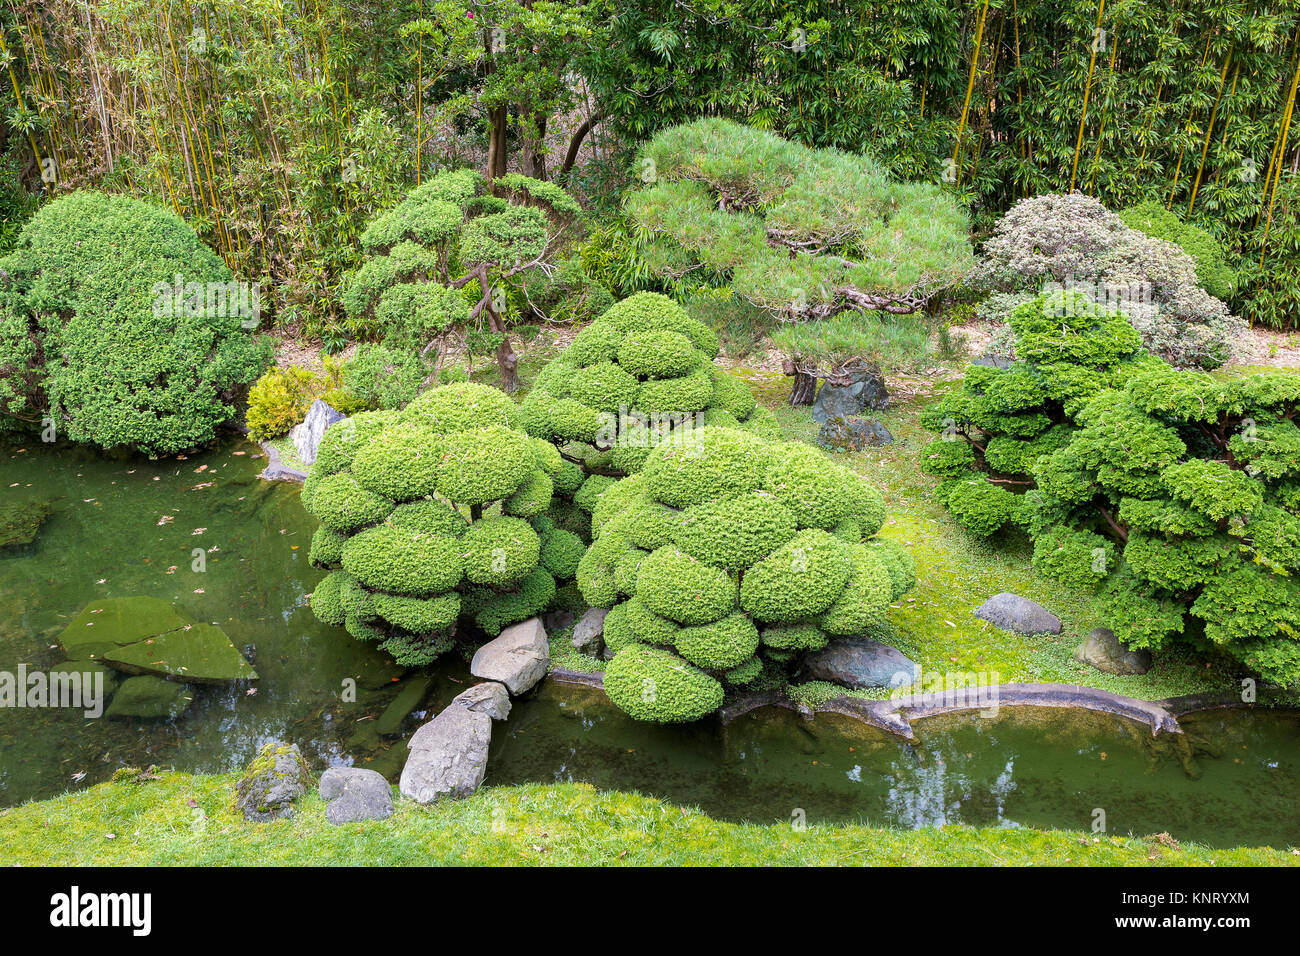 Cloud-pruned dwarf conifers edge a tranquil rill and pond with rocks and stones and a stand of bamboo behind. Japanese Tea Garden at Golden Gate Park, Stock Photo